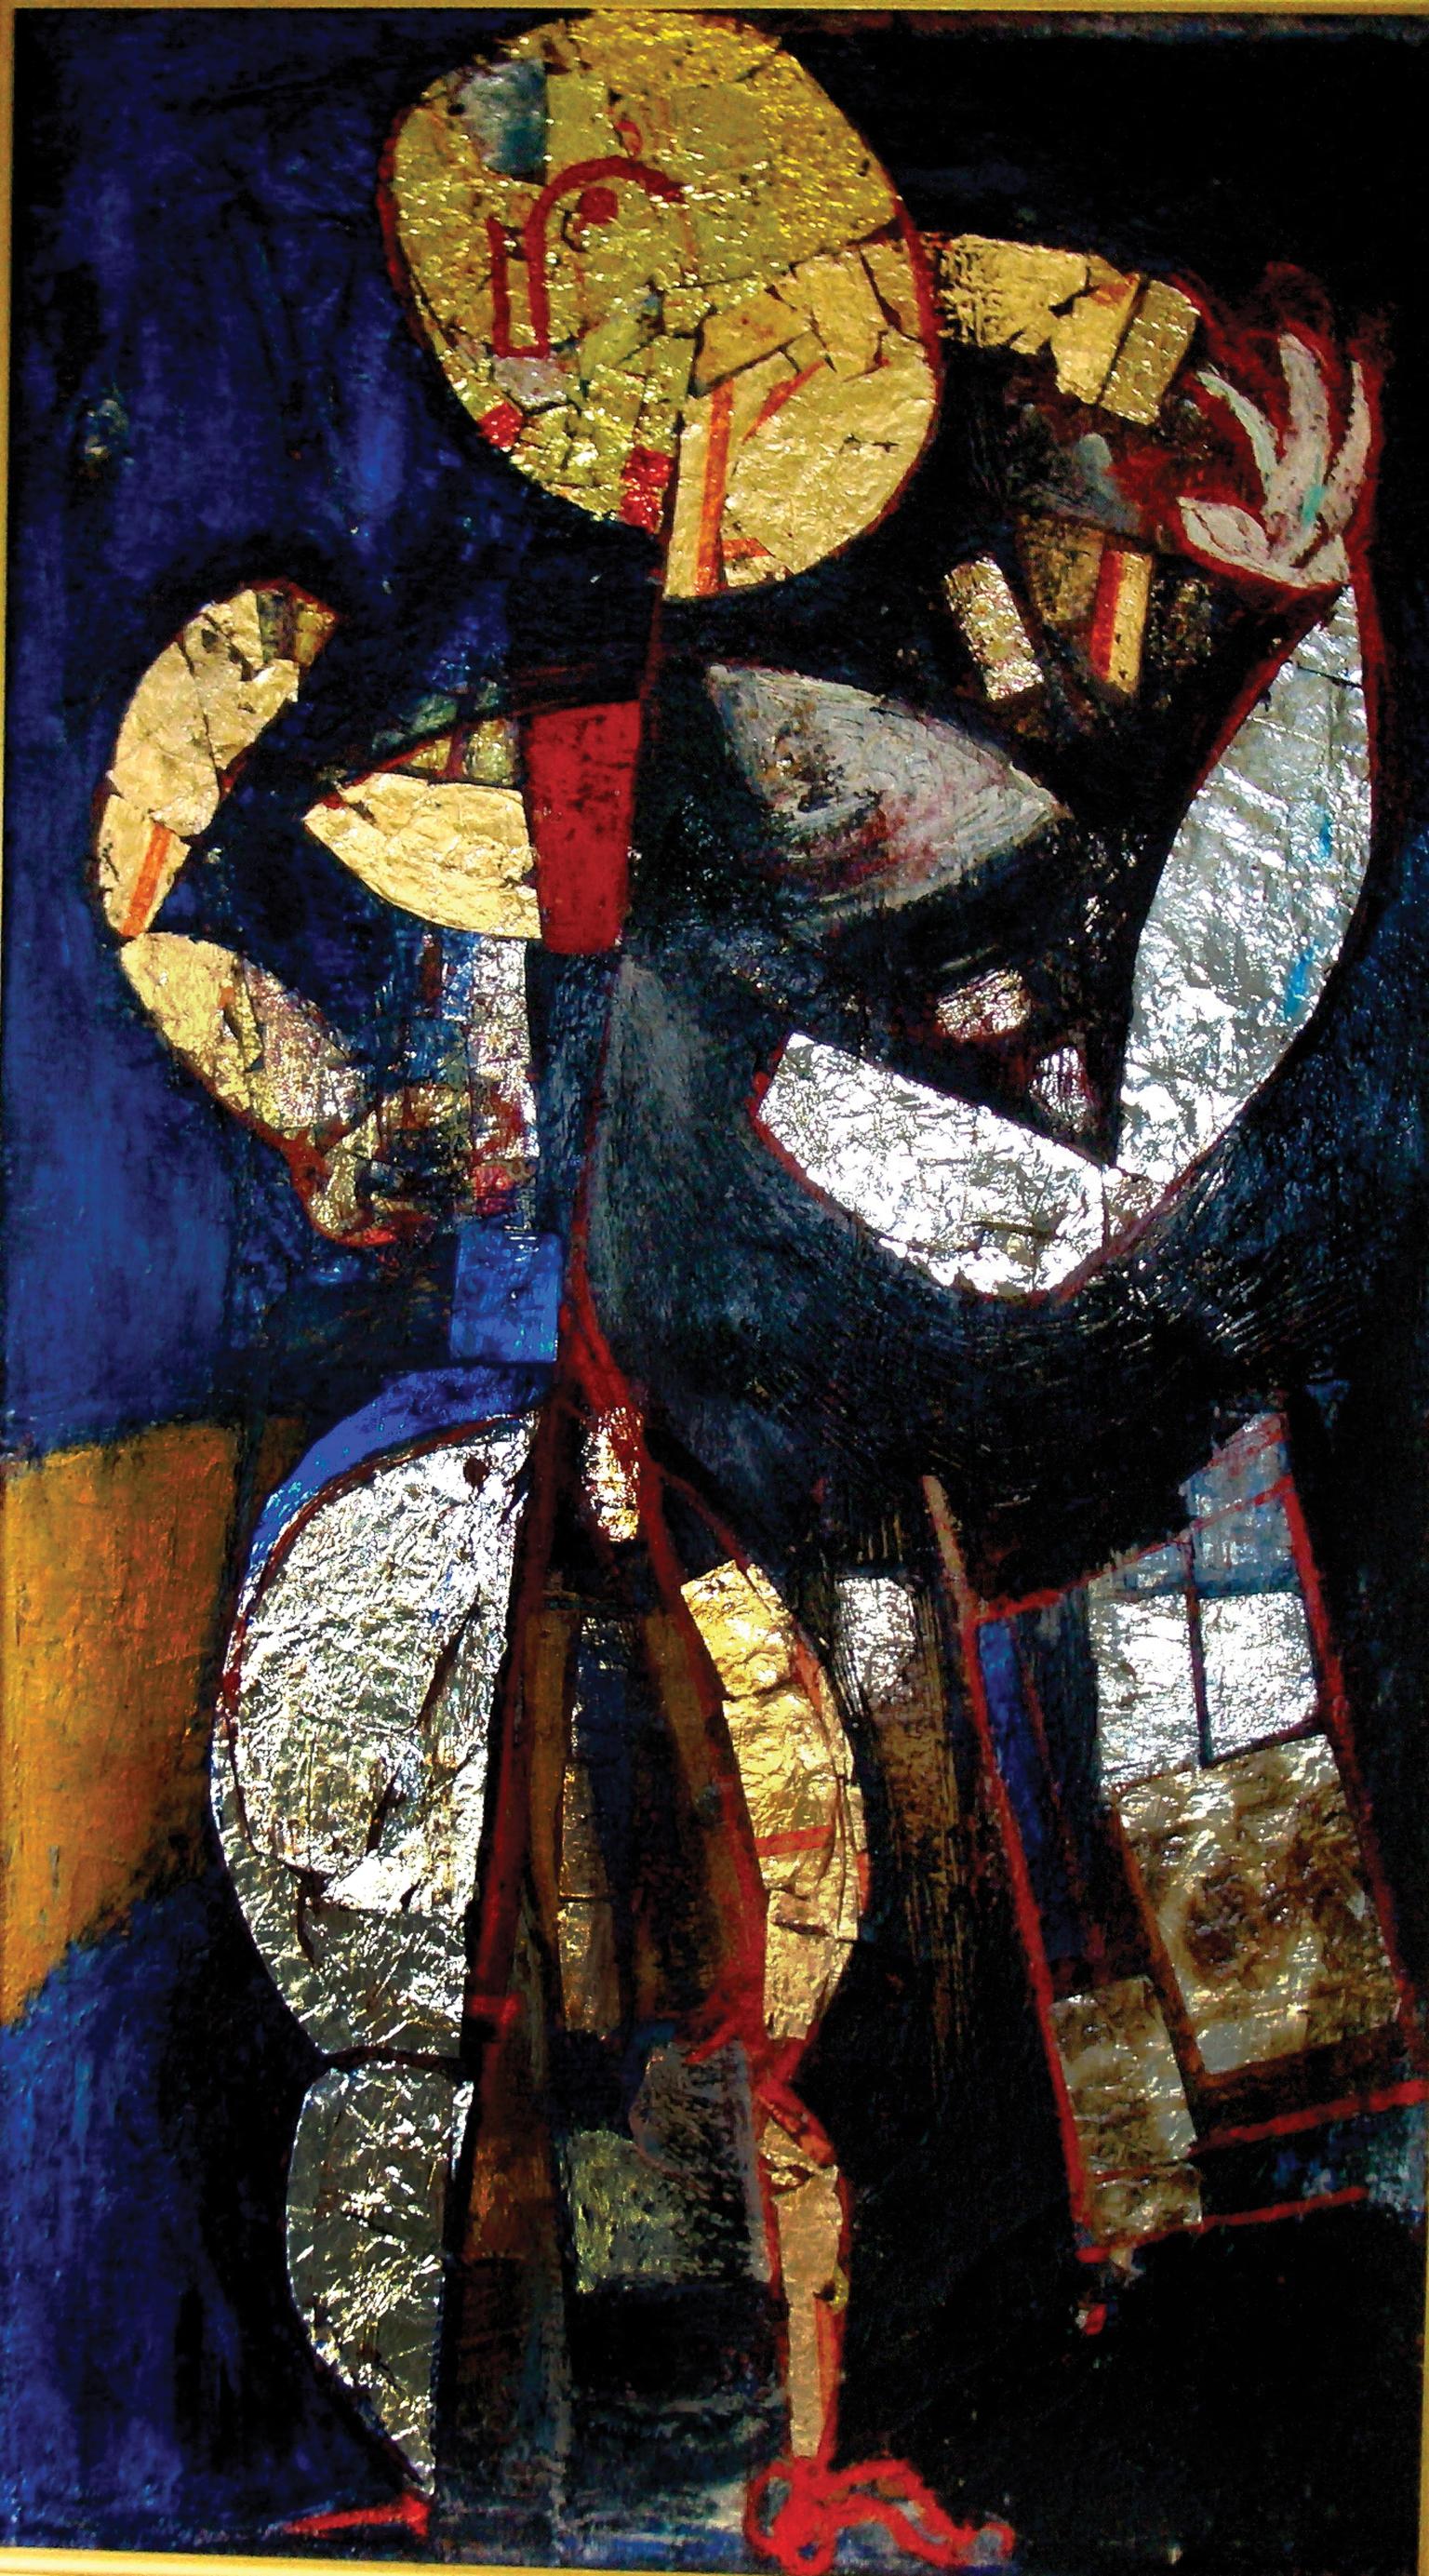 Abstract painting of geometric figures embracing.